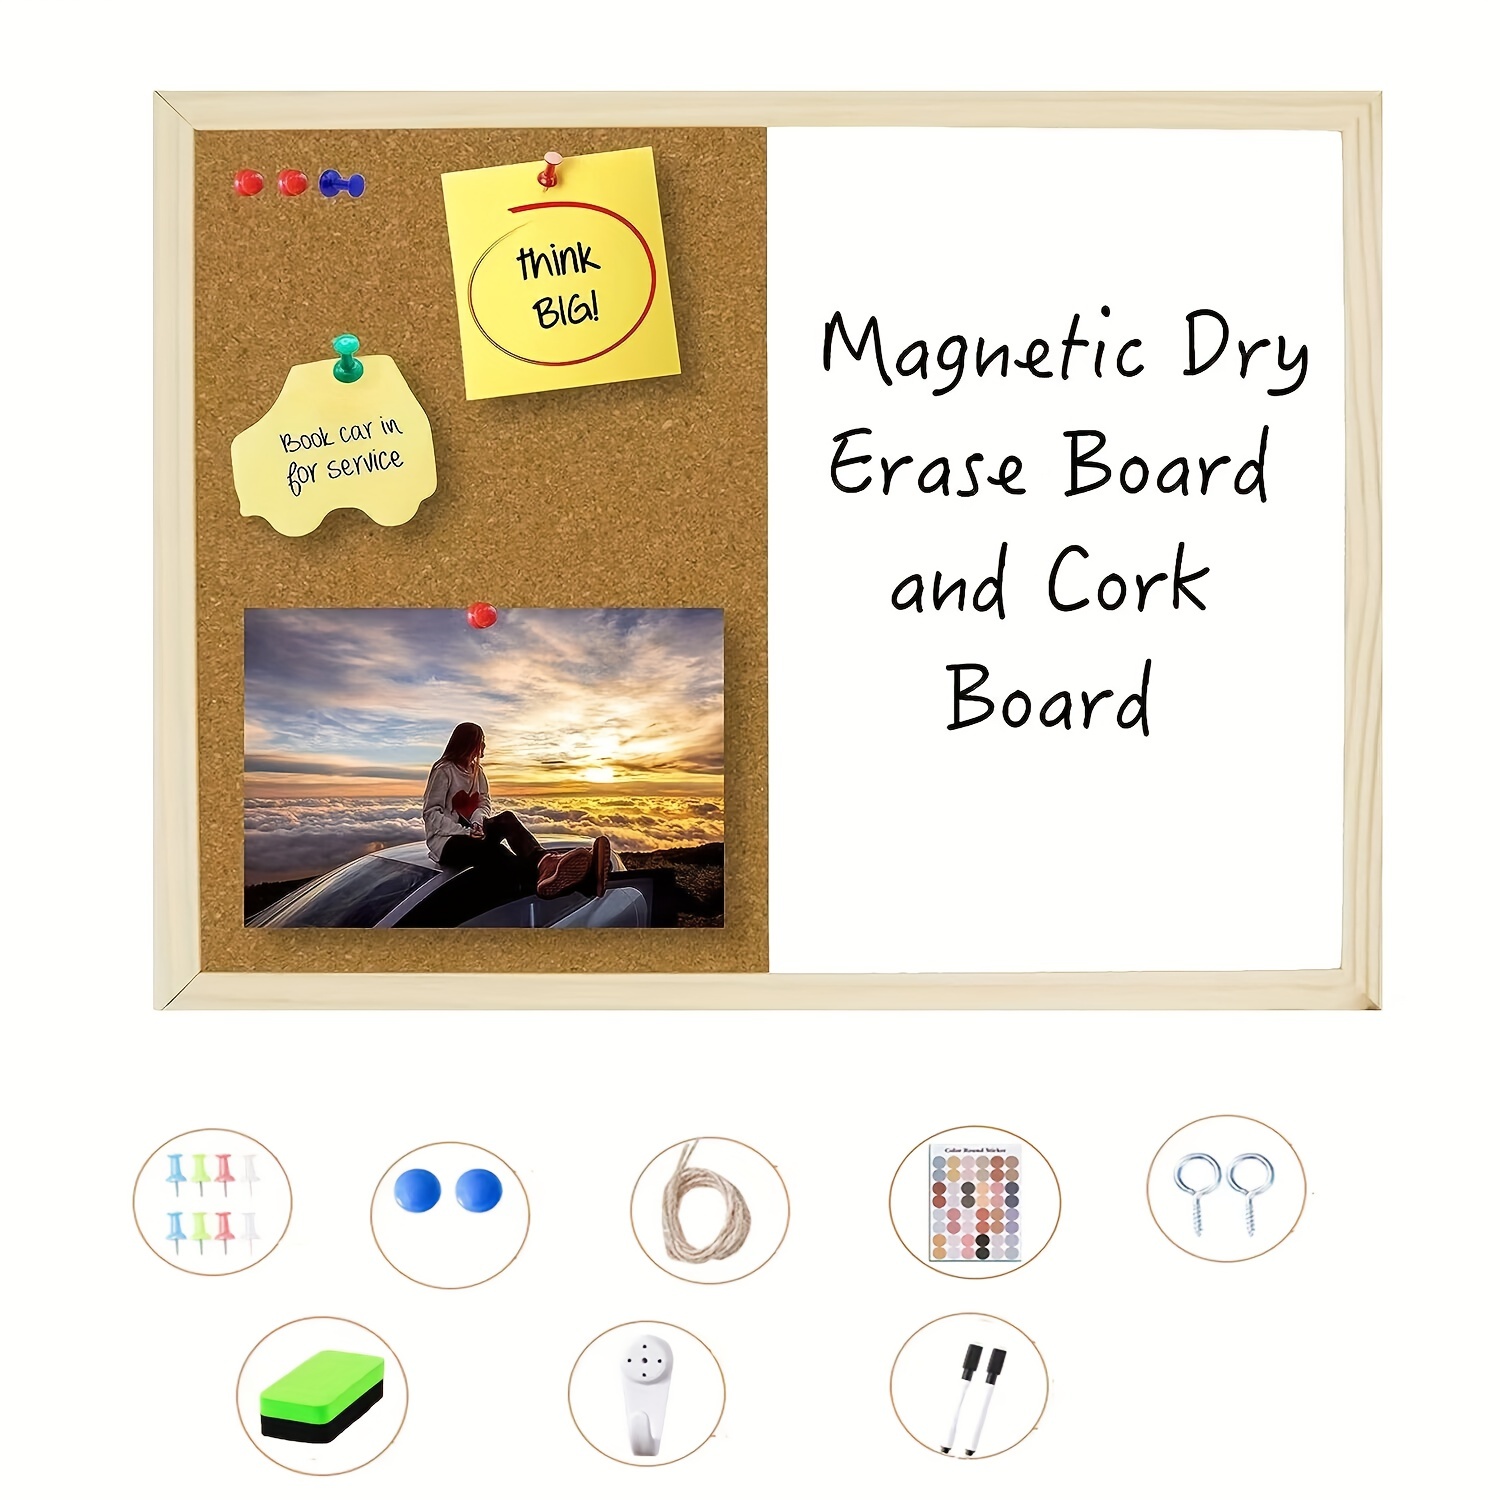 https://img.kwcdn.com/product/whiteboard-double-sided-picture-board/d69d2f15w98k18-56809ff7/Fancyalgo/VirtualModelMatting/601d00bb6033d297e8e1af31e9bfb1ee.jpg